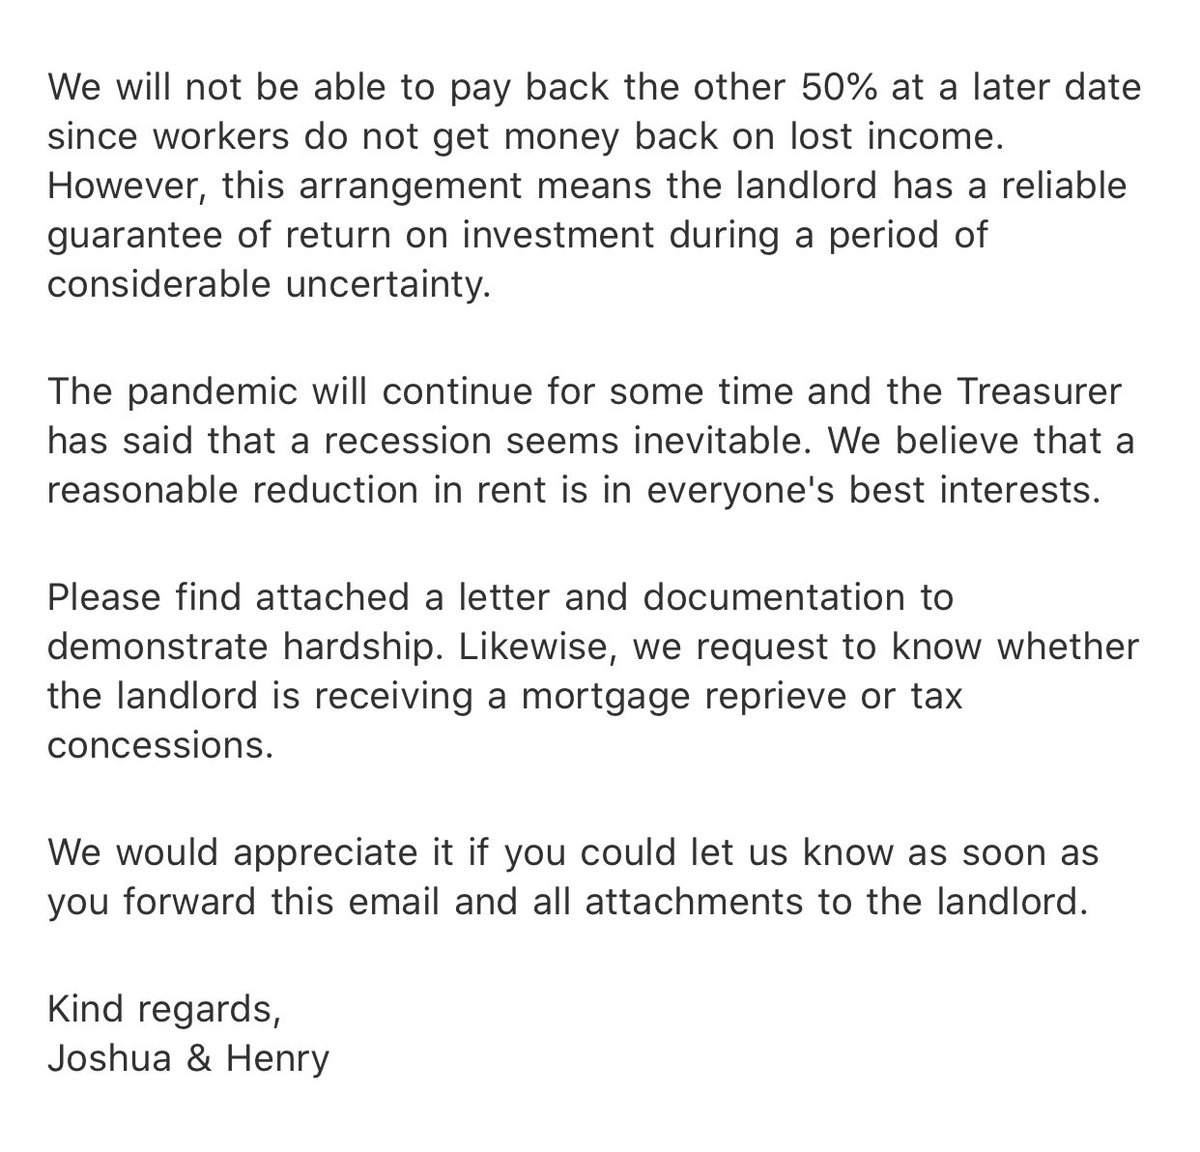 Emailed our landlord to negotiate a reasonable rent reduction. We’ve offered to try and cover costs & asked for a 50% decrease for the next six months